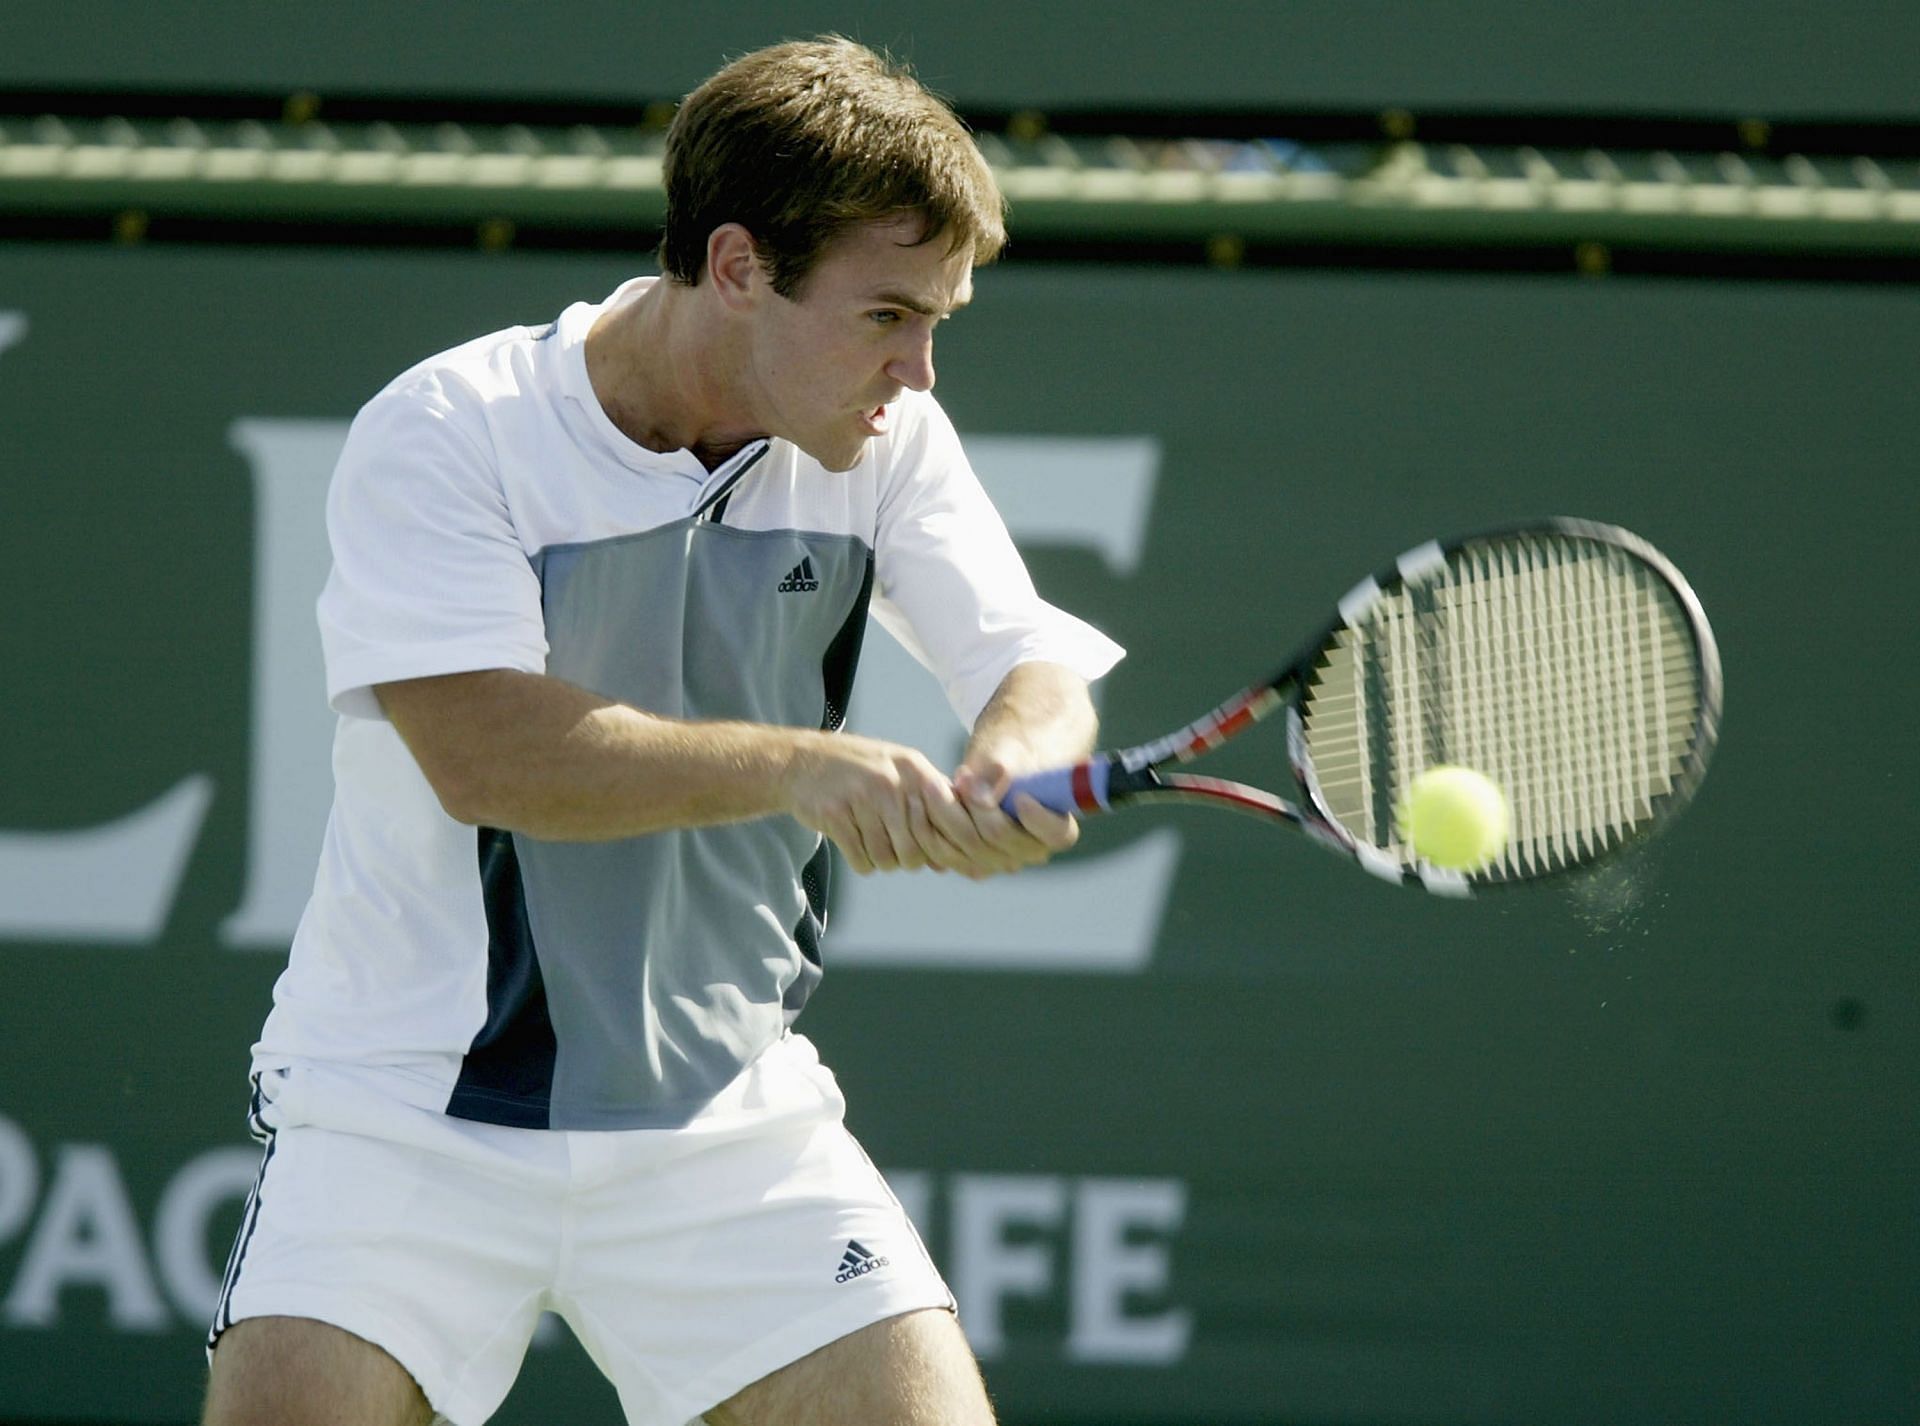 Brian Vahaly at the Indian Wells Tennis Garden in Indian Wells, California in 2004